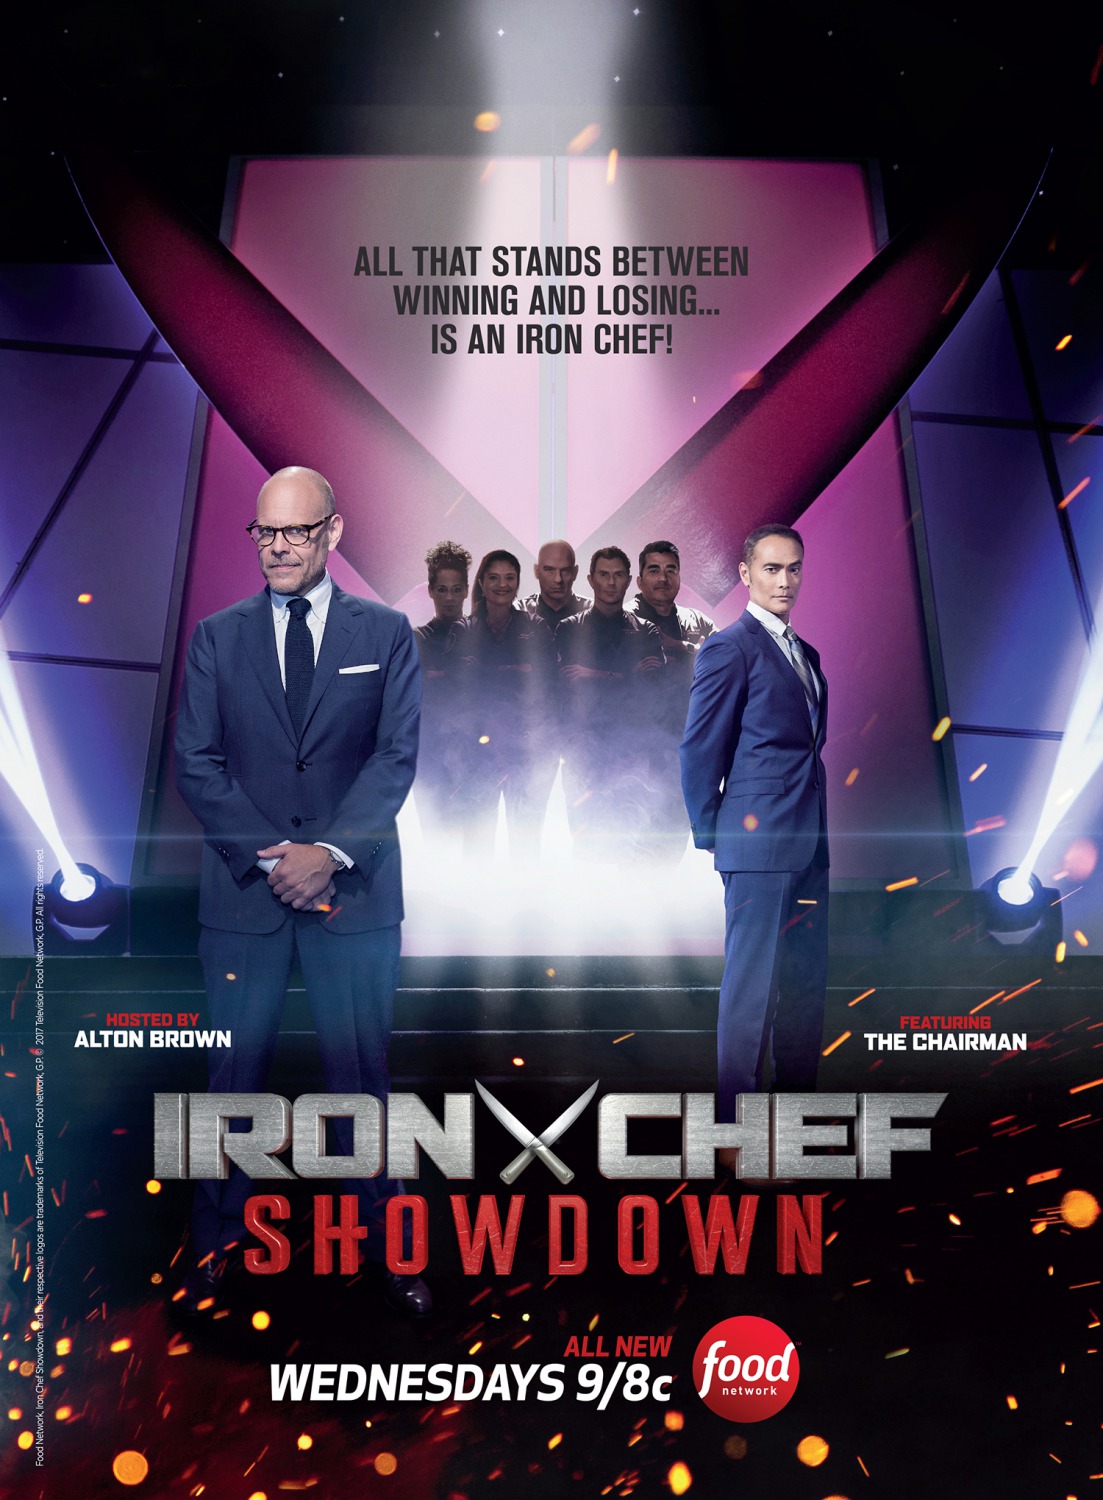 Extra Large TV Poster Image for Iron Chef Showdown 